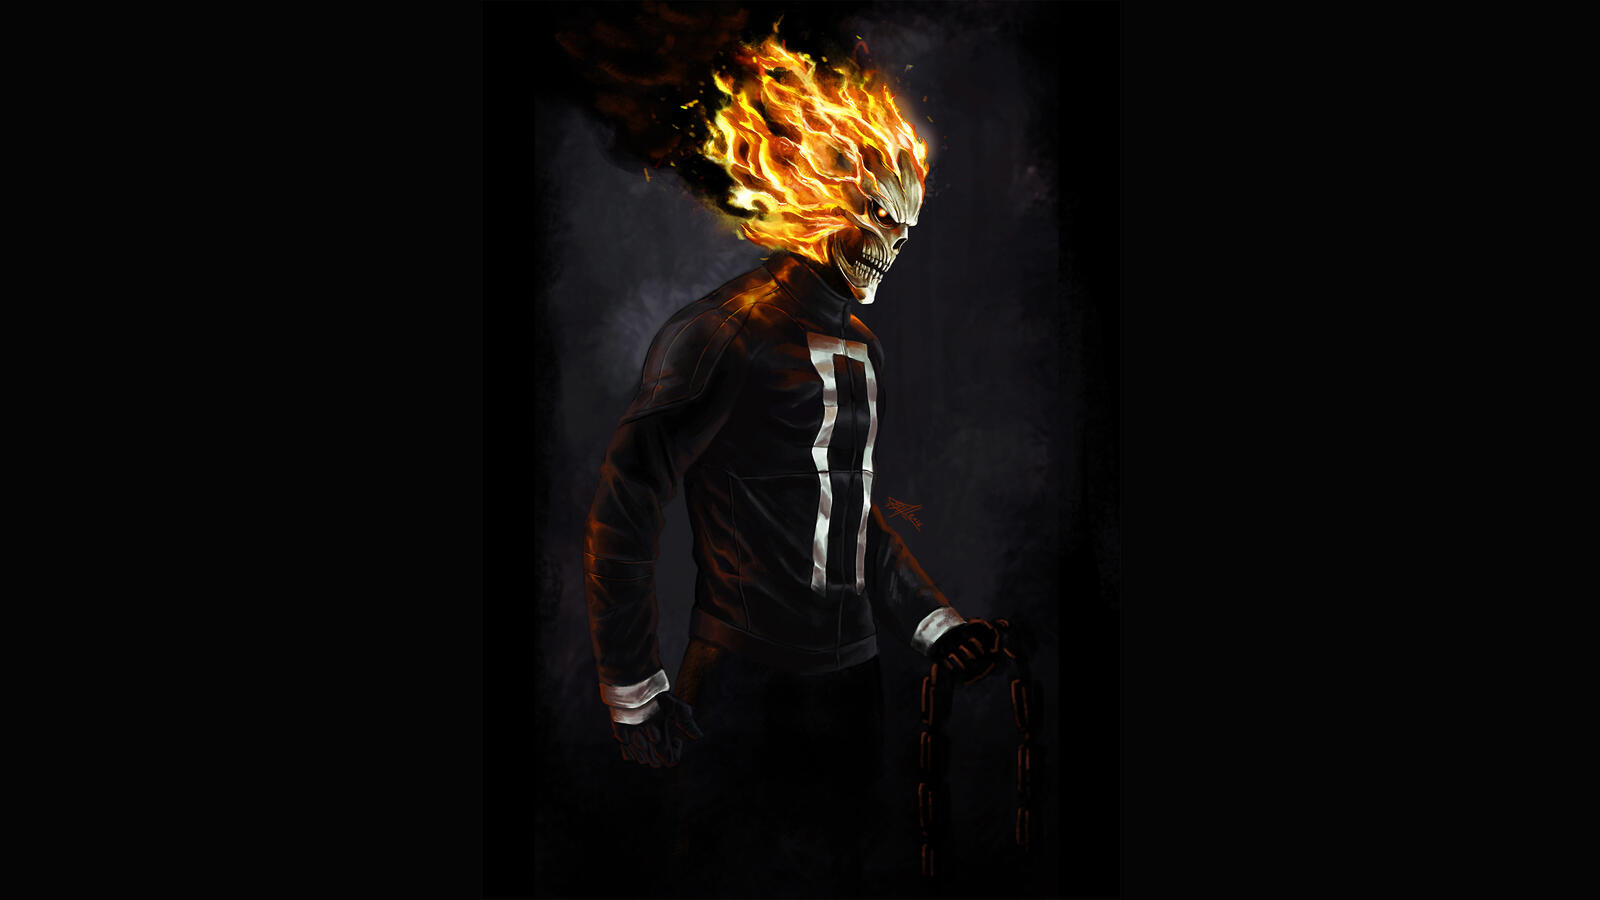 Wallpapers ghost rider rendering fire on the desktop